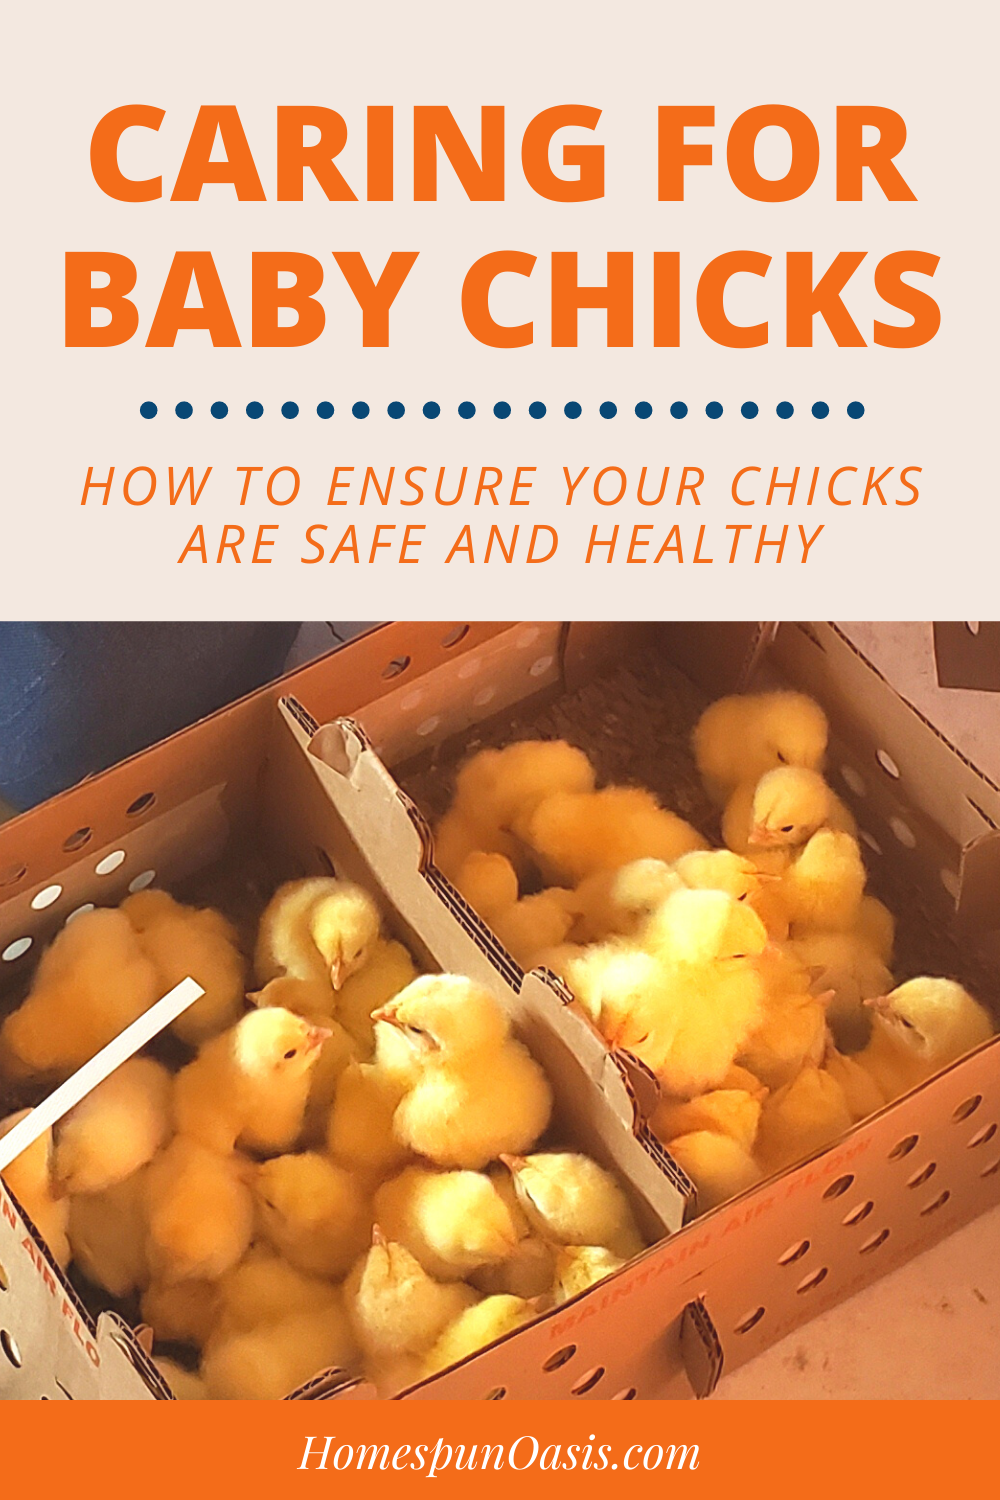 Caring for Baby Chicks